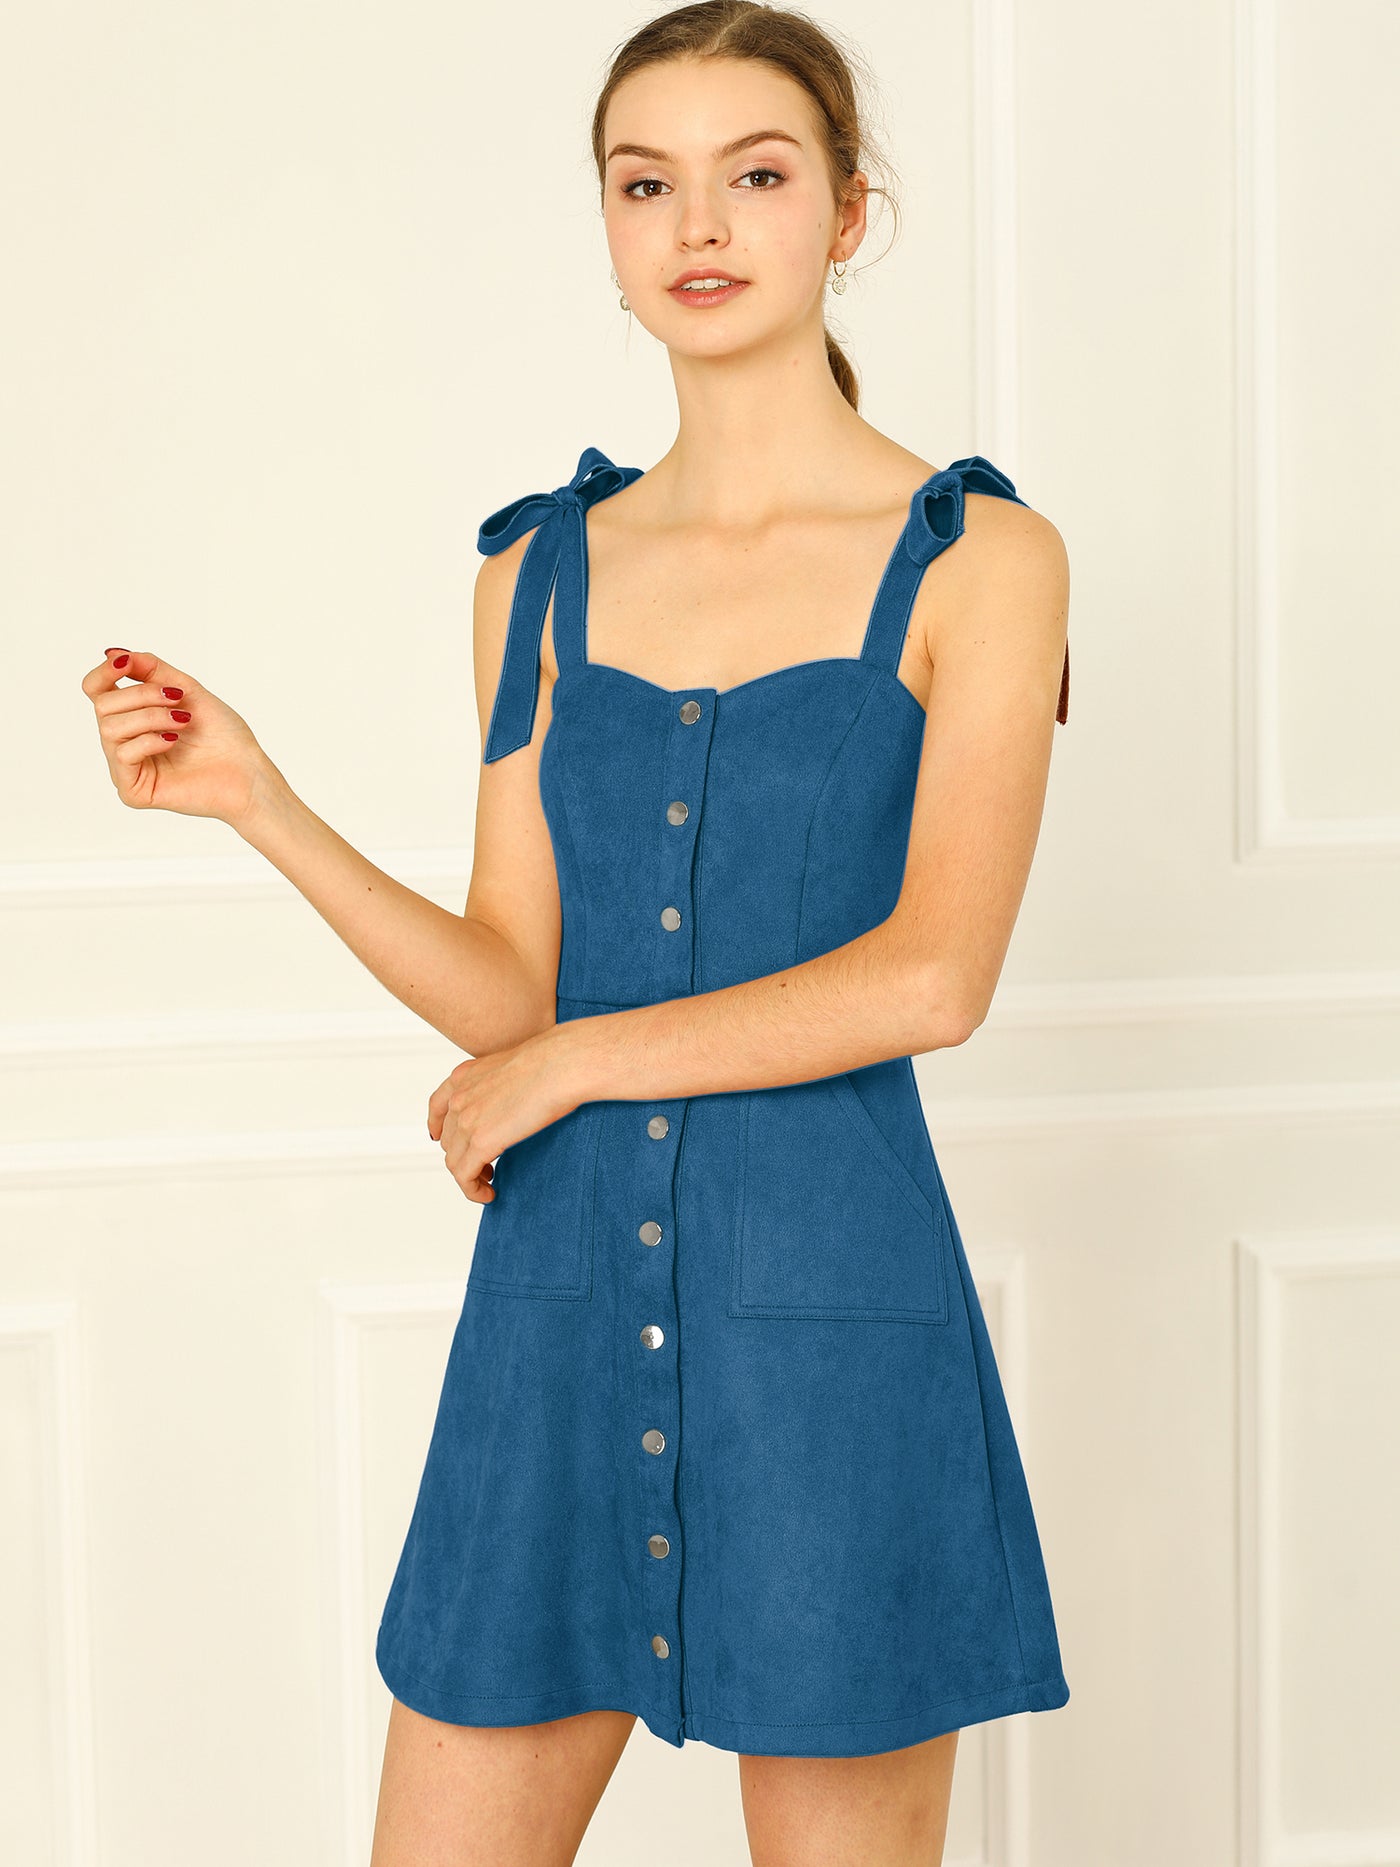 Allegra K Casual Pinafore Overall Button Down Sleeveless Faux Suede Dress